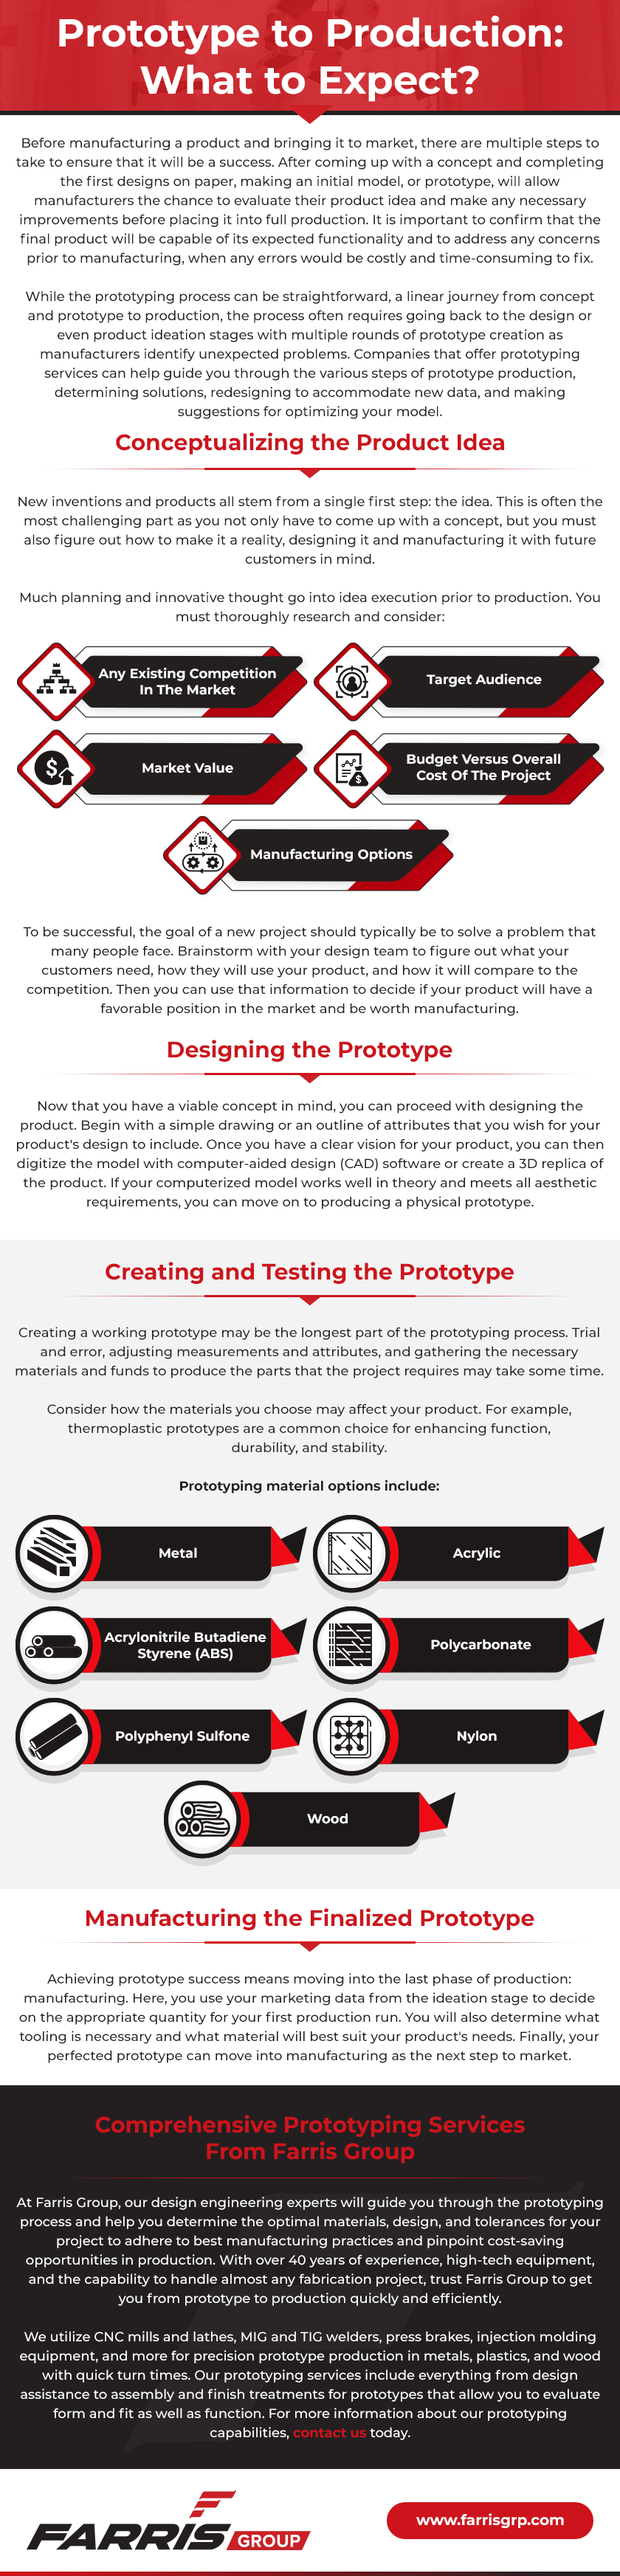 Prototype-to-Production-What-to-Expect